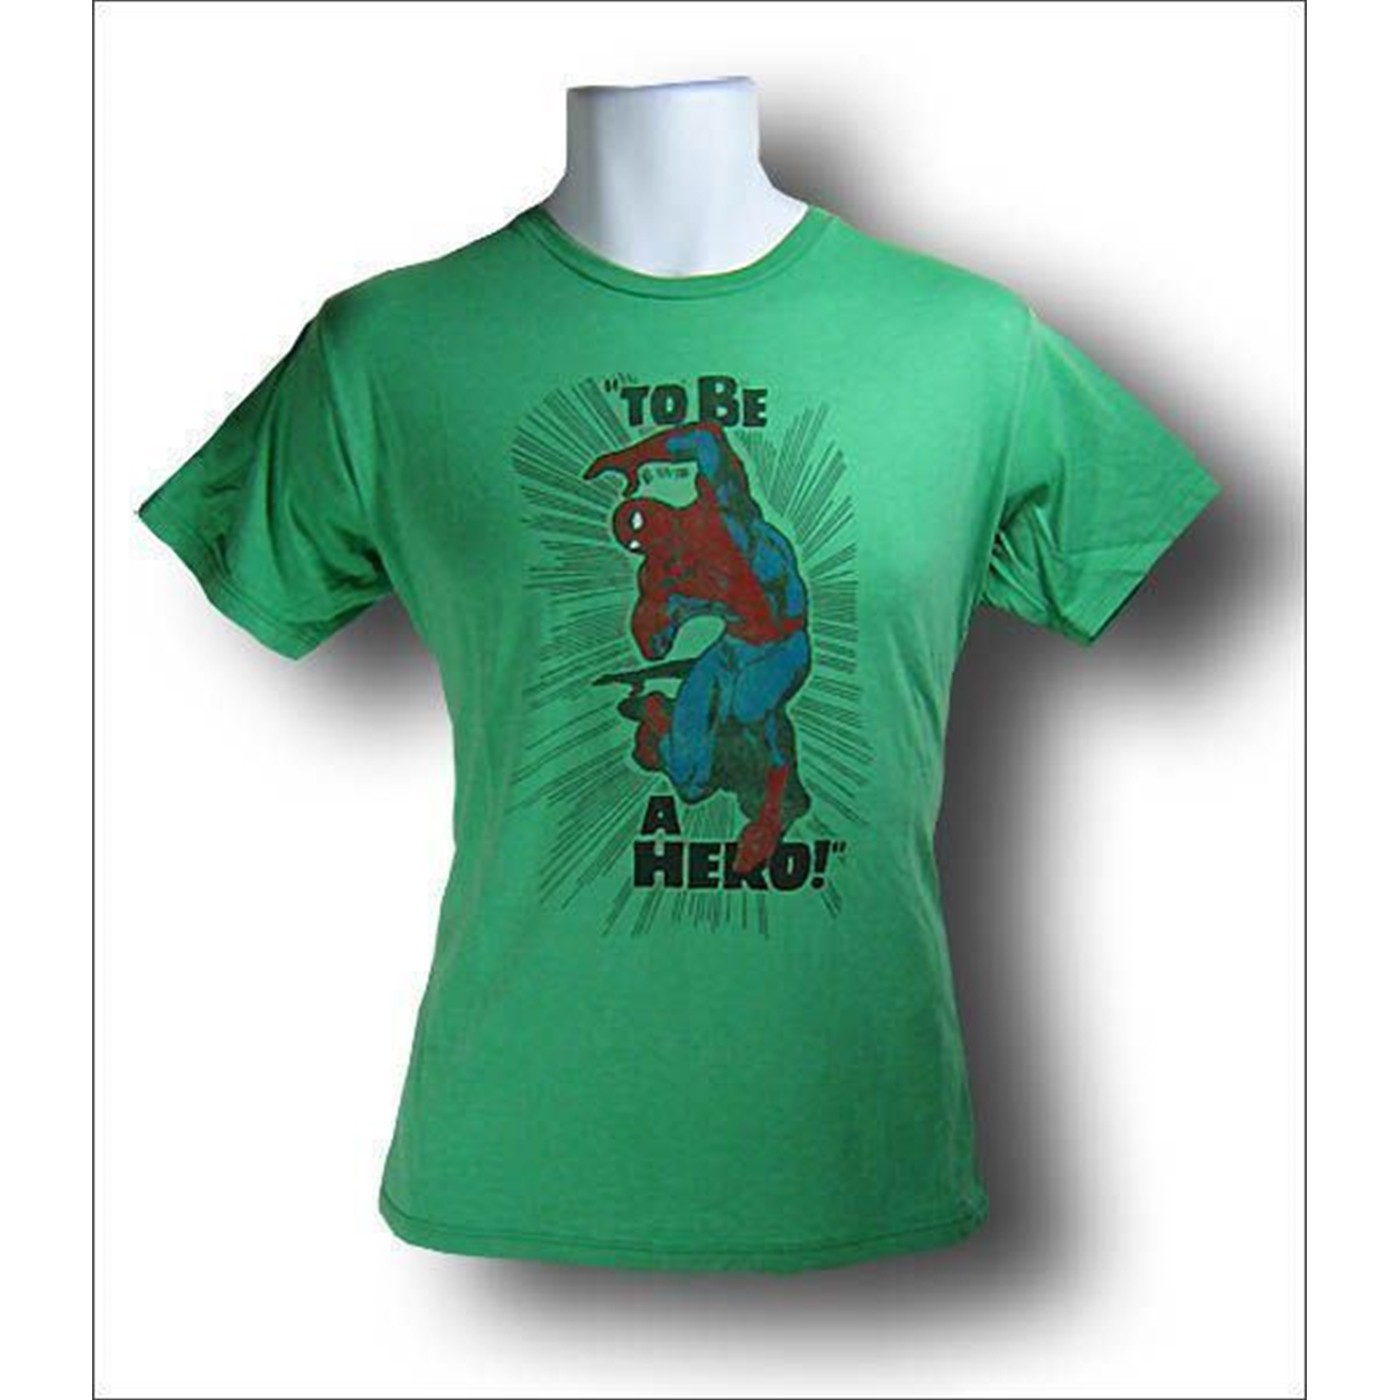 Spiderman To Be A Hero T-shirt